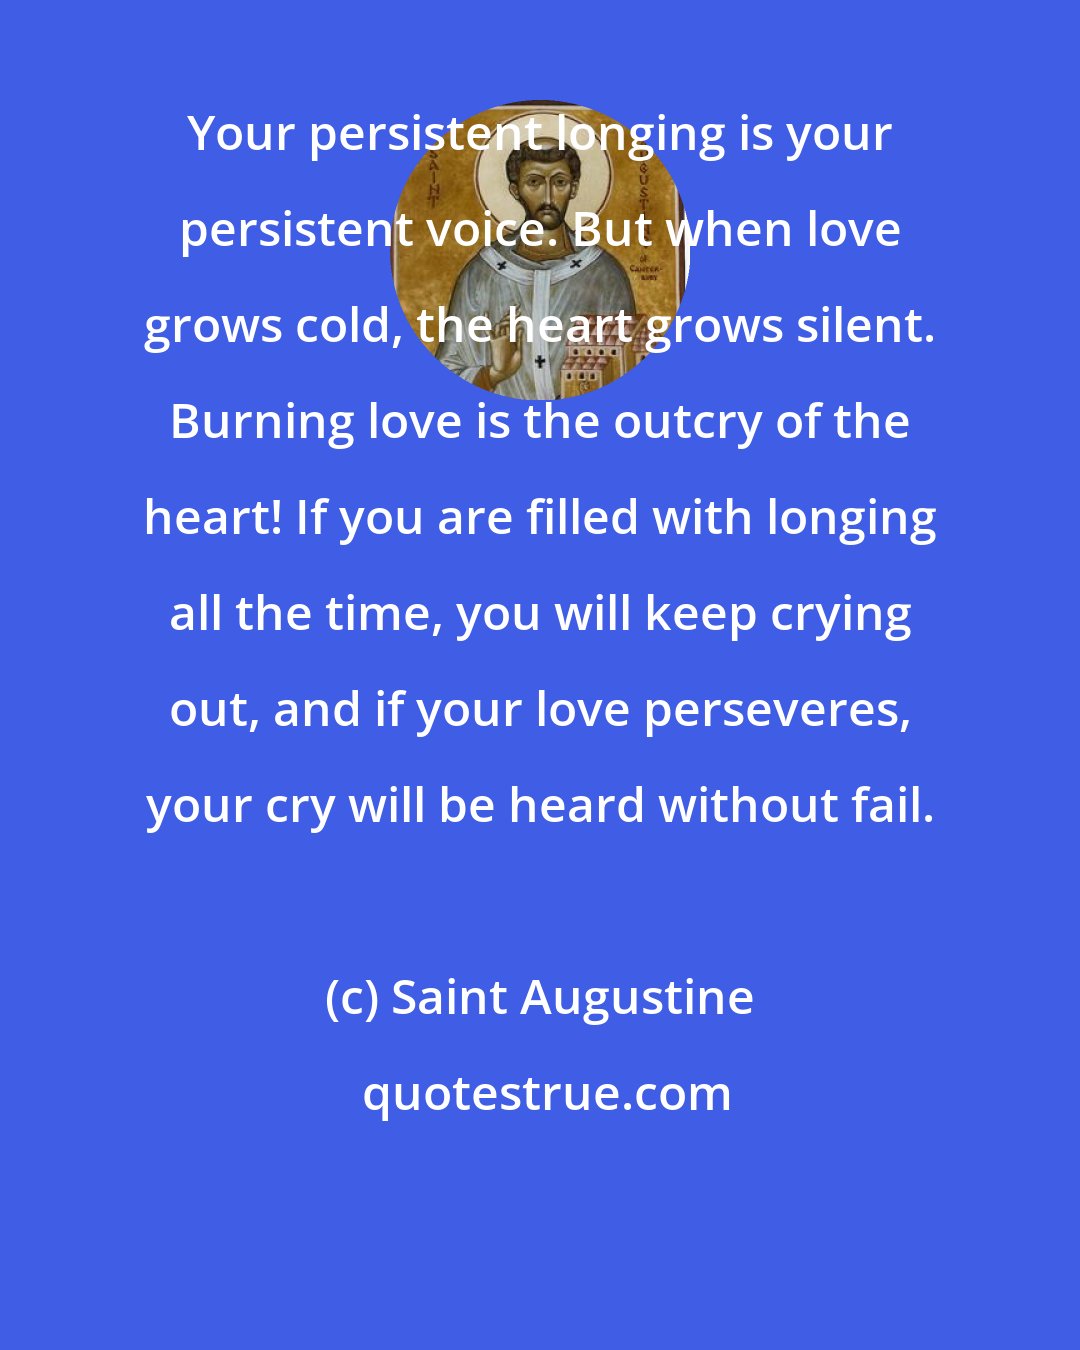 Saint Augustine: Your persistent longing is your persistent voice. But when love grows cold, the heart grows silent. Burning love is the outcry of the heart! If you are filled with longing all the time, you will keep crying out, and if your love perseveres, your cry will be heard without fail.